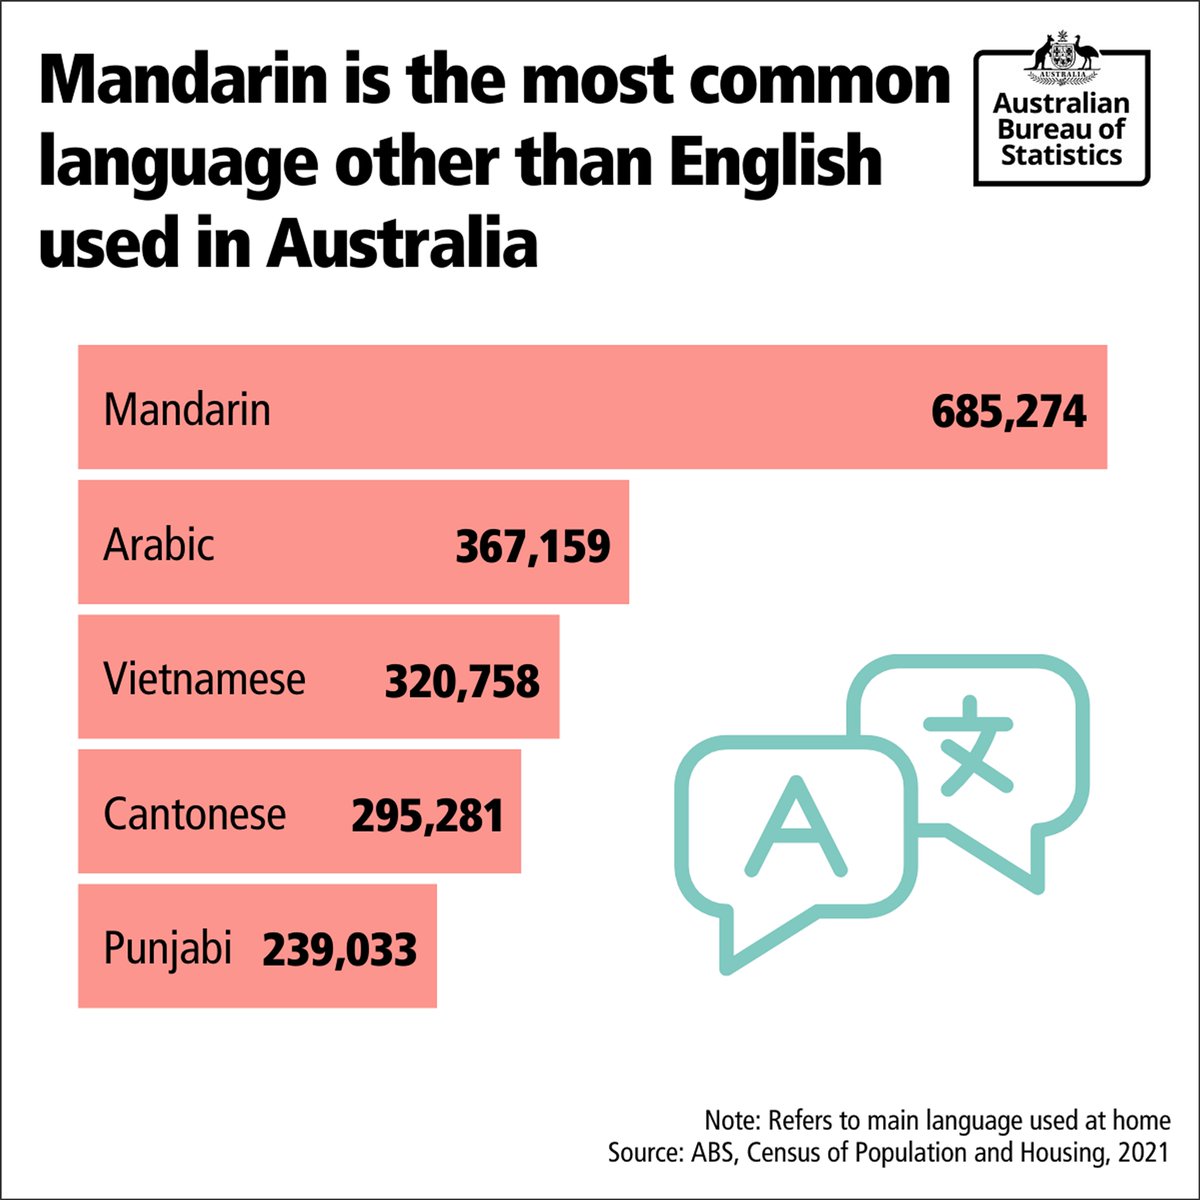 It's #ChineseLanguageDay! There are over one million people in Australia who use a Chinese language at home, including Mandarin and Cantonese which are both in the top 5!